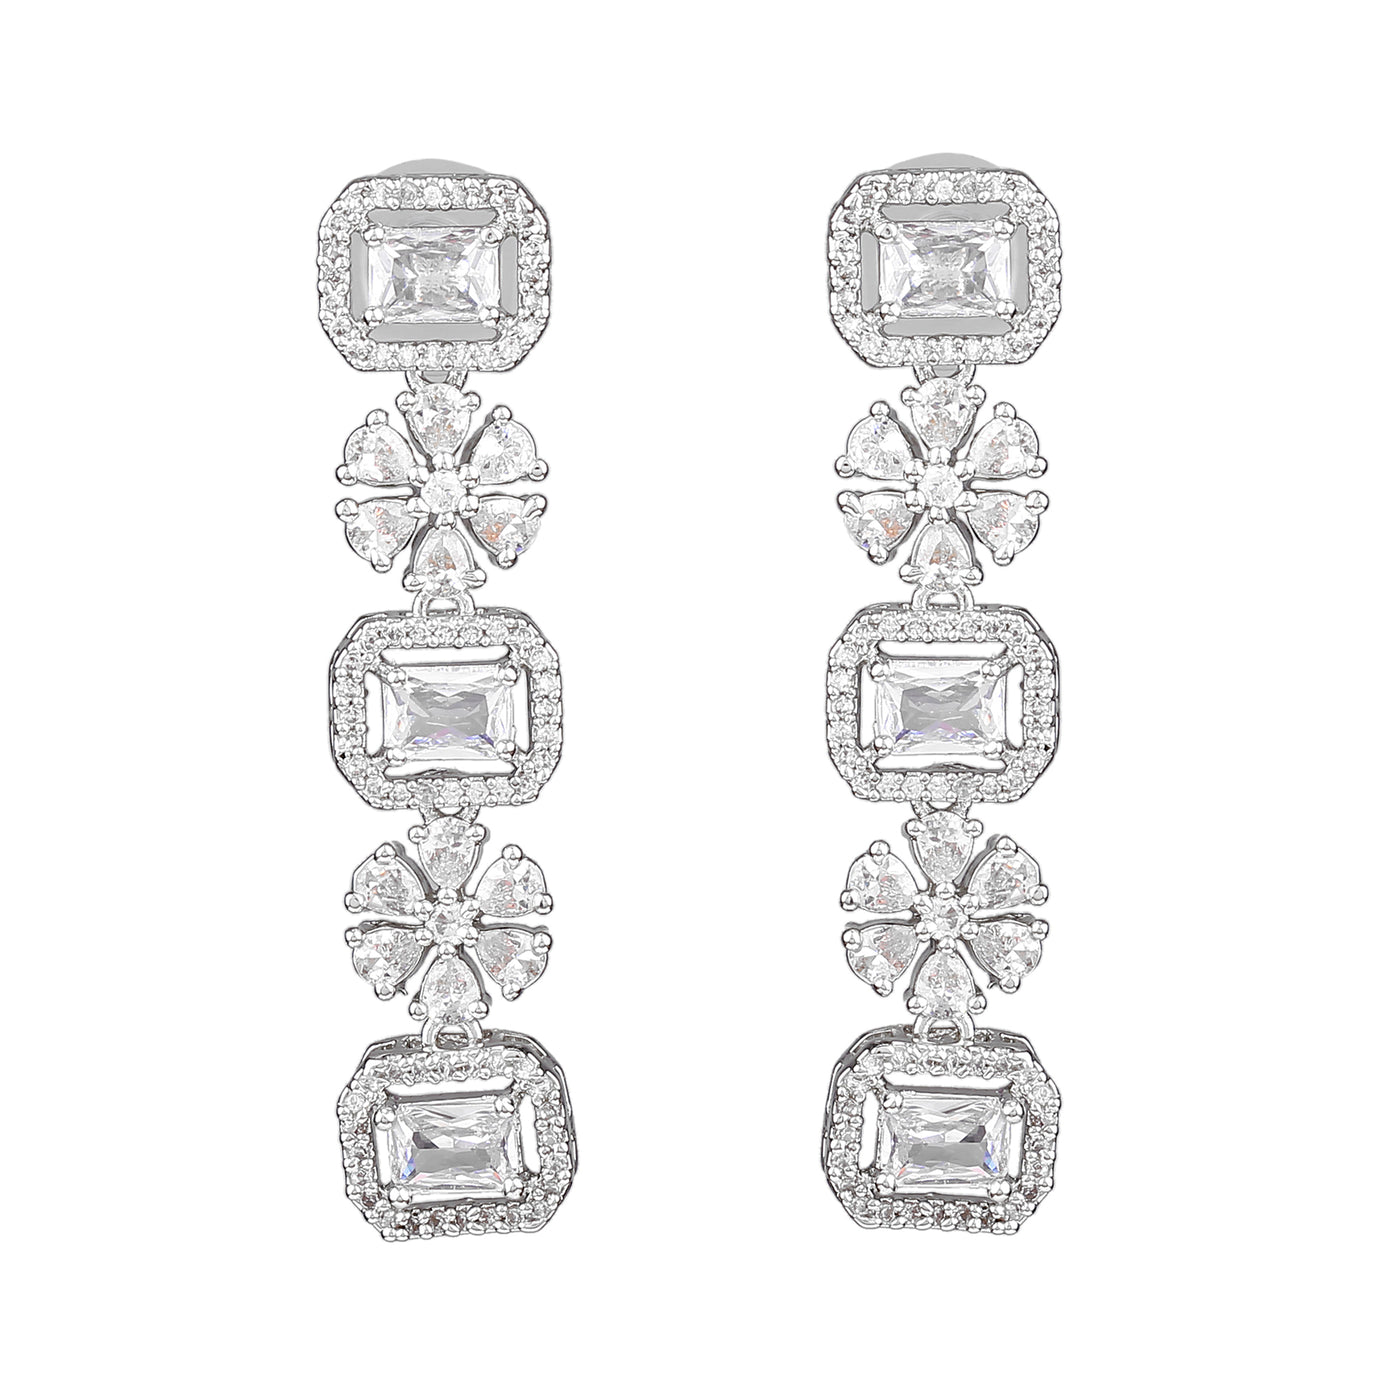 Estele Rhodium Plated CZ Magnificent Designer Three Layered Necklace Set with White Crystals for Women